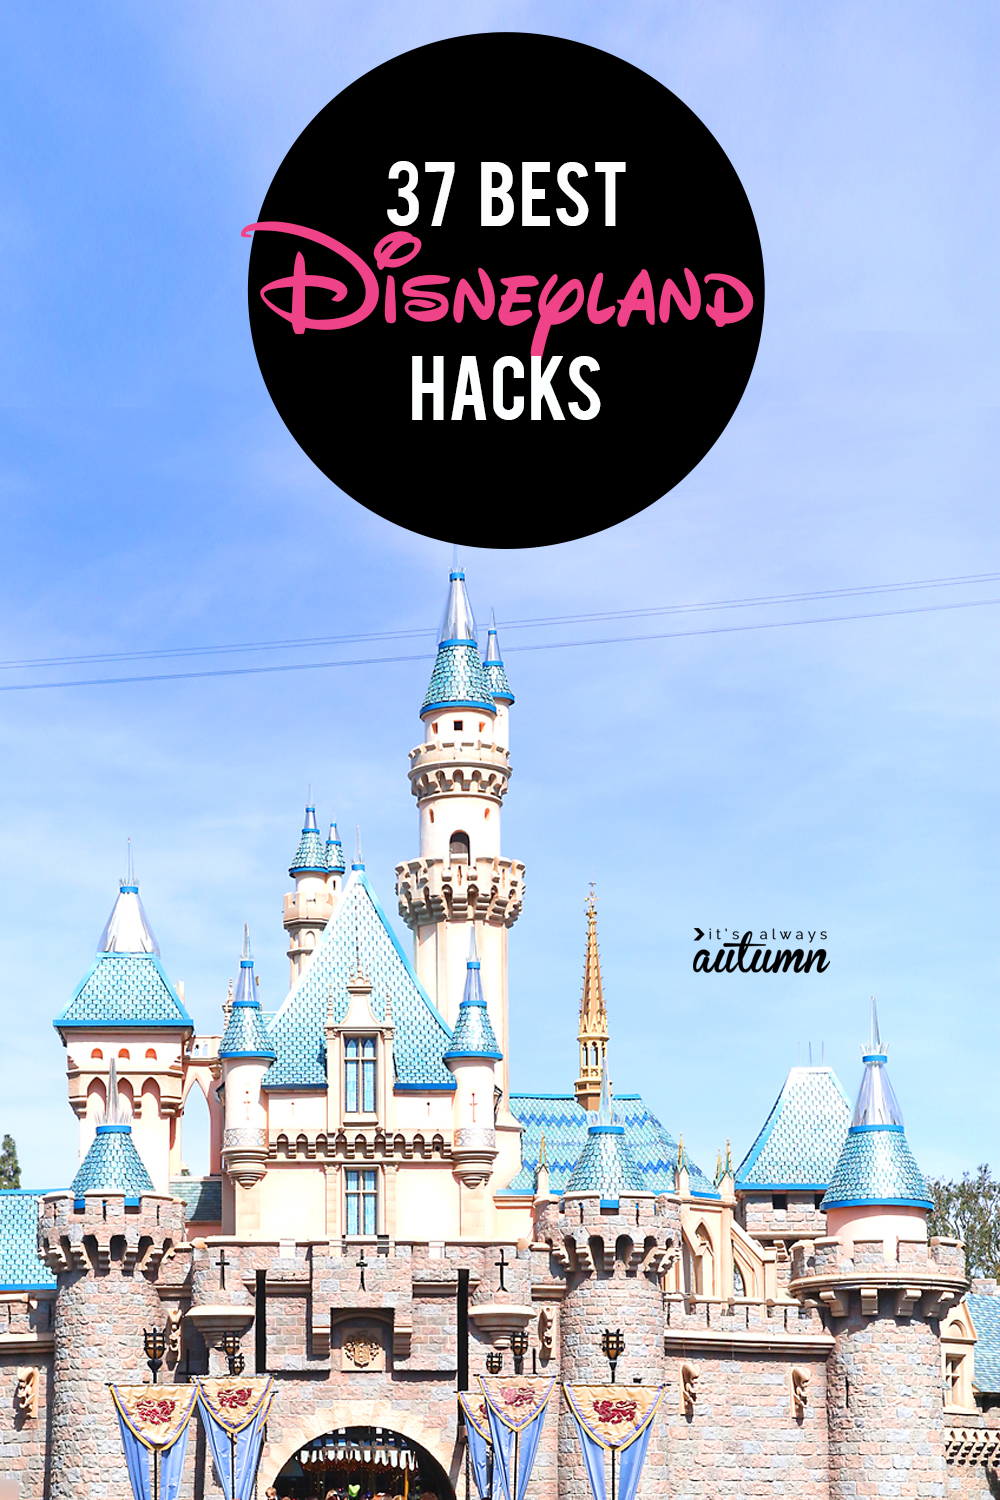 37 smart Disneyland hacks so you can plan your best trip yet! Disney tips and tricks.